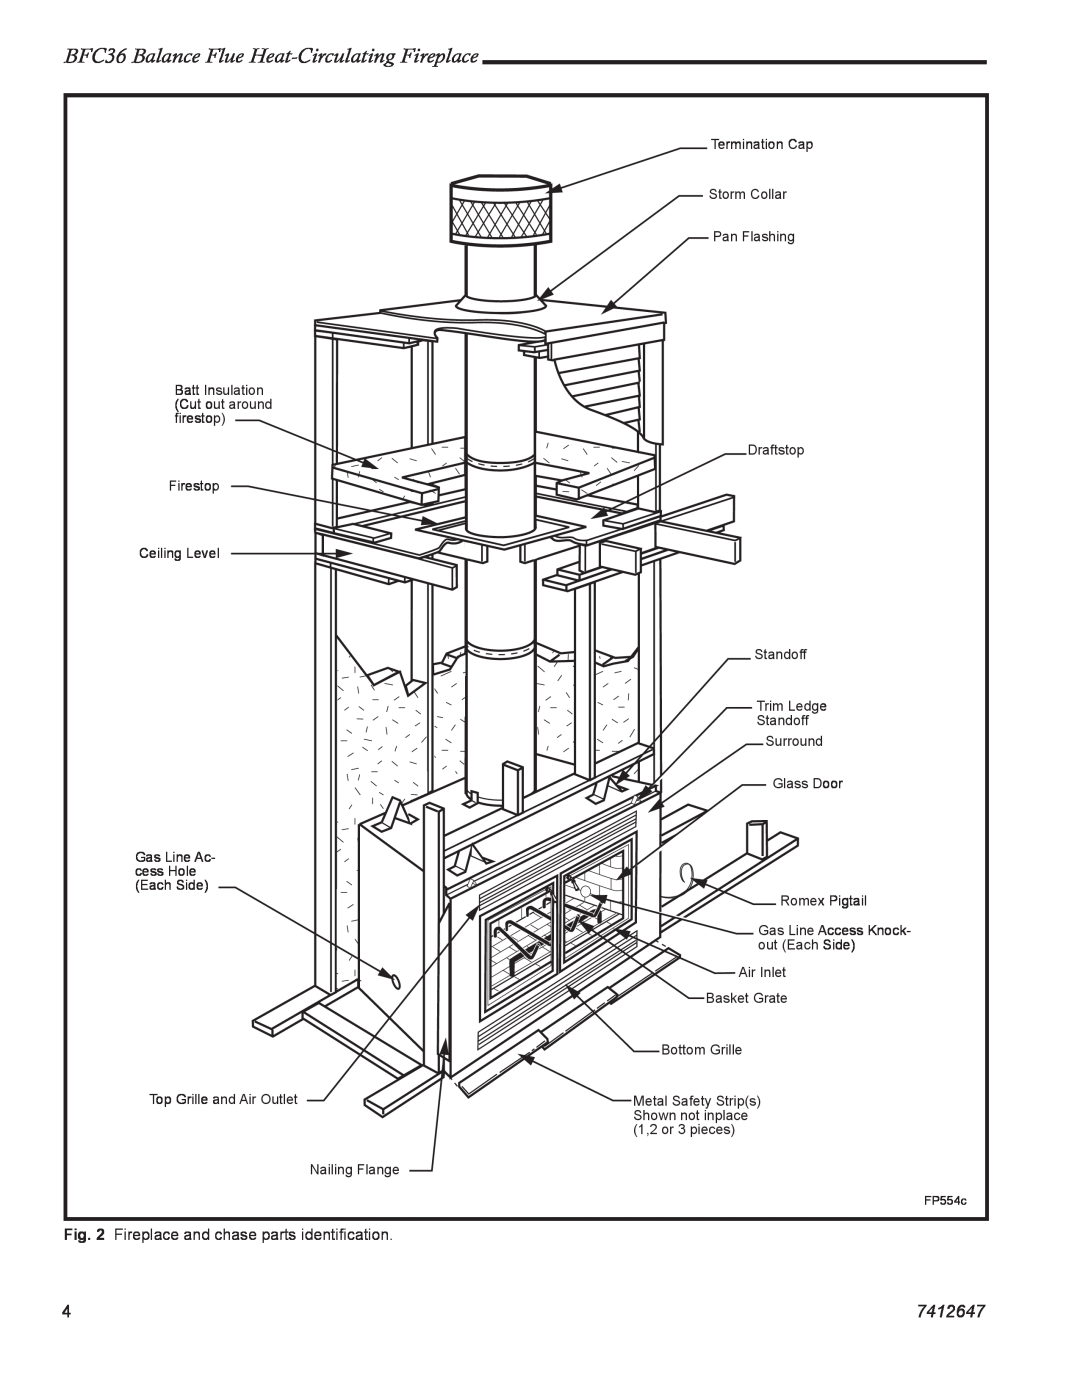 Vermont Casting manual BFC36 Balance Flue Heat-CirculatingFireplace, 7412647, Fireplace and chase parts identiﬁcation 